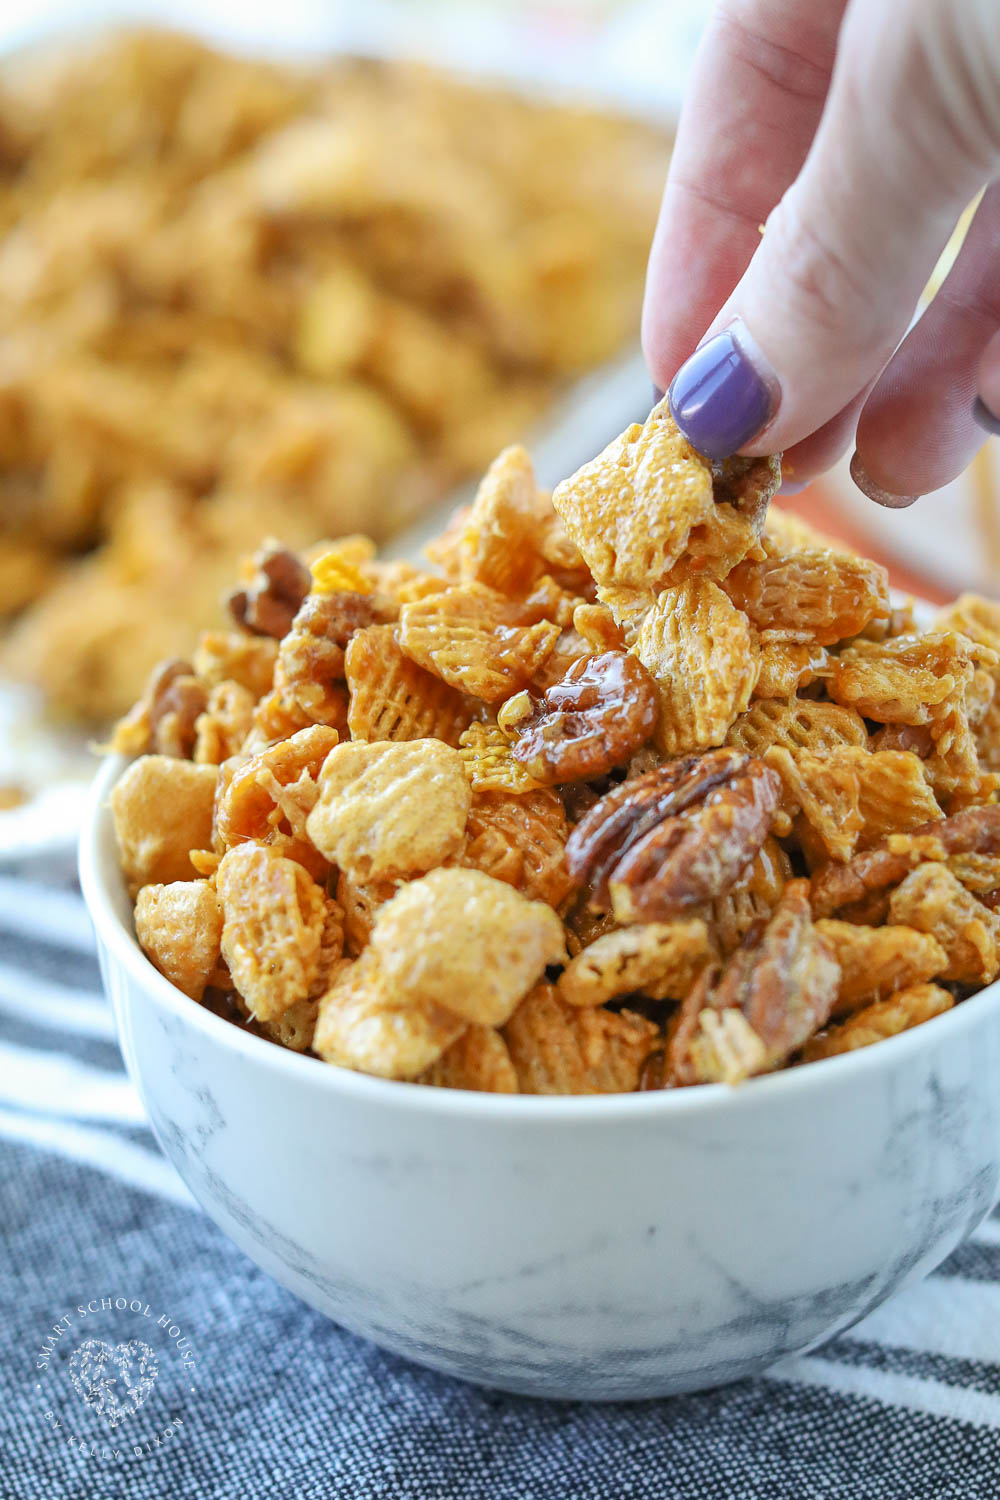 Praline crunch is sweet, salty, and deliciously addicting! Crispix and pecans are covered in a fluffy, buttery, and sugary coating.